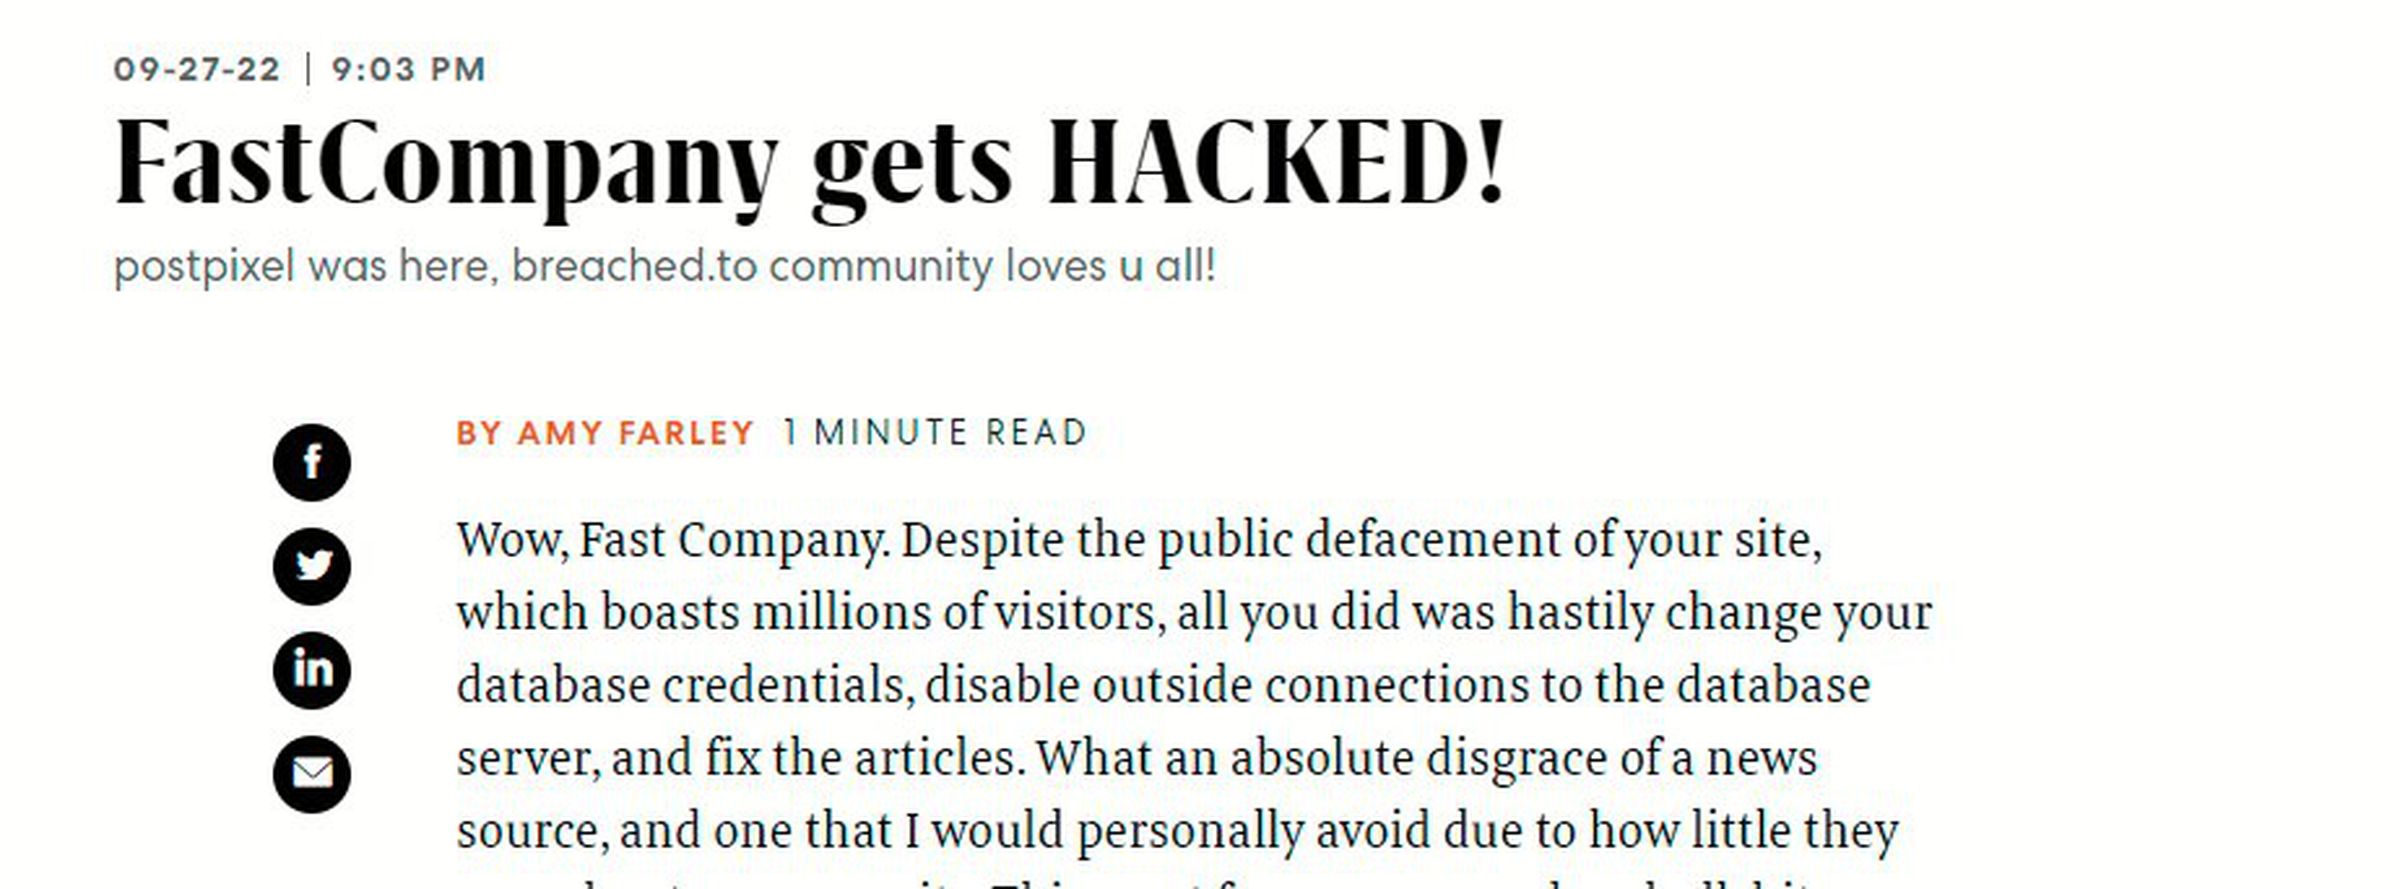 “Wow, Fast Company. Despite the public defacement of your site, which boasts millions of visitors, all you did was hastily change your database credentials, disable outside connections to the database server, and fix the articles. What an absolute disgrace of a news source, and one that I would personally avoid due to how little they care about user security.”